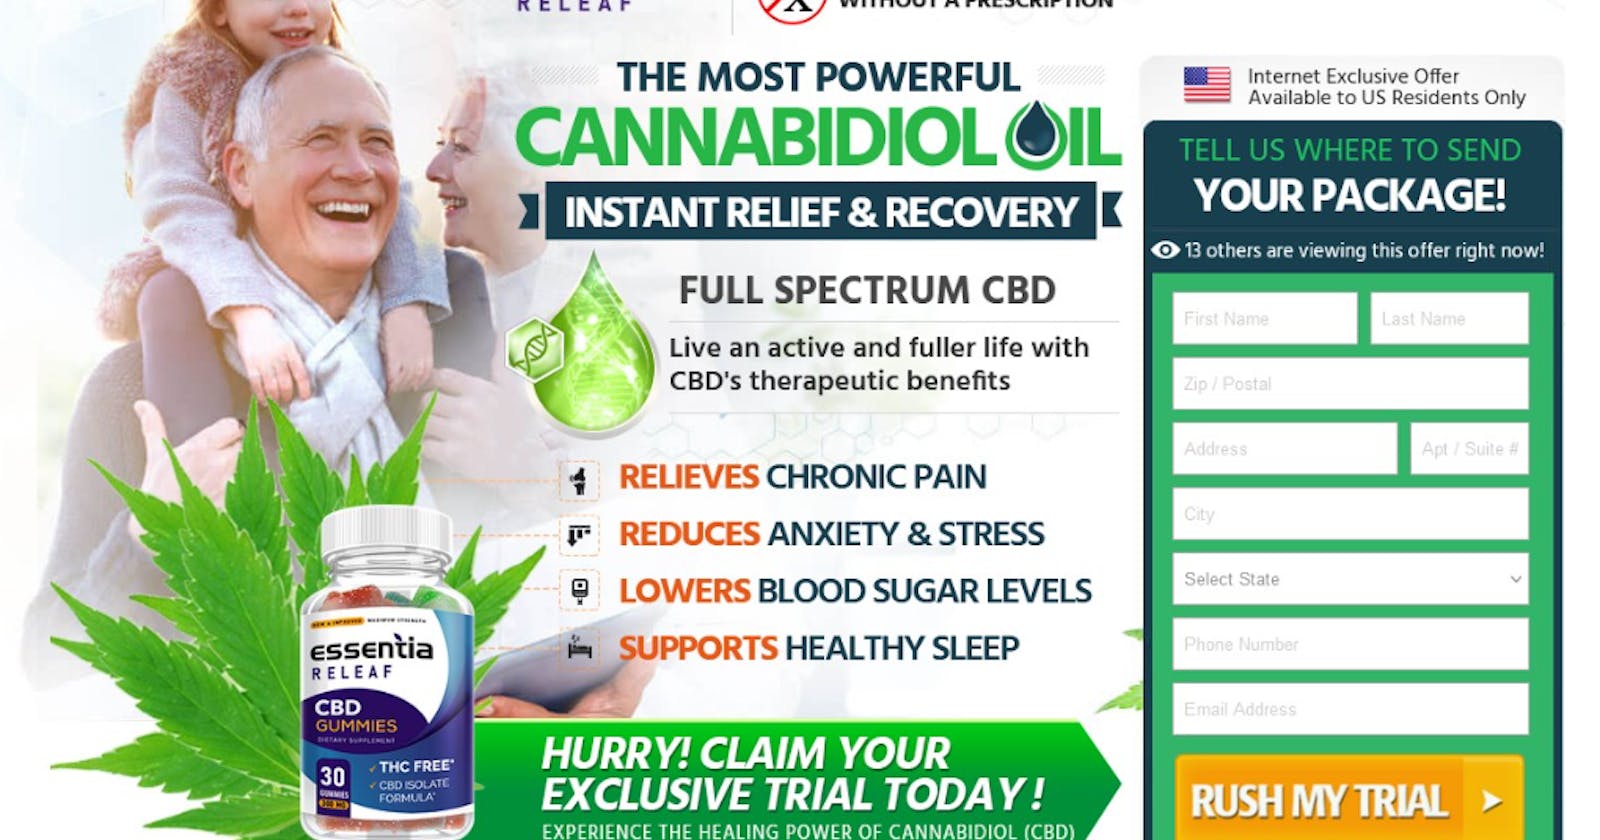 Essentia Releaf CBD Gummies [Scam or Legit] Official Website, Working, Reviews & Price! Uses, Side Effects, and More!